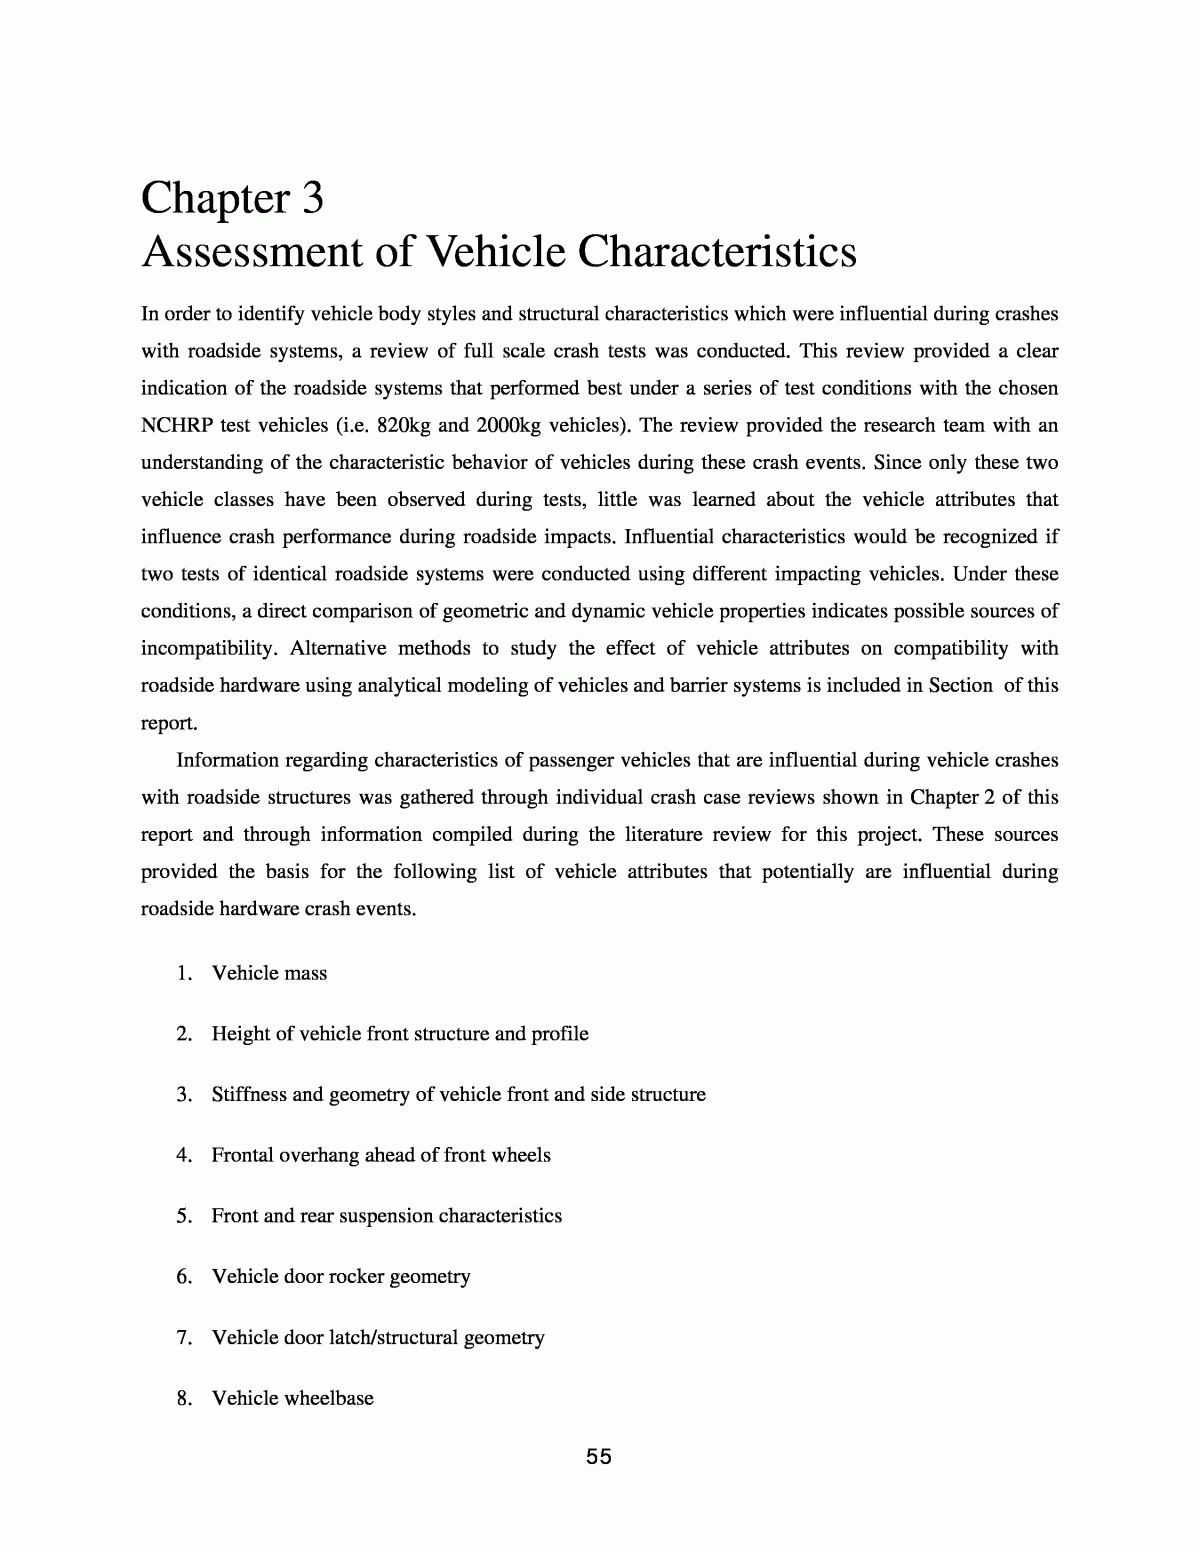 Printables Of Chapter 3 Basic Vehicle Control Worksheet Answers As Well As Chapter 3 Basic Vehicle Control Worksheet Answers